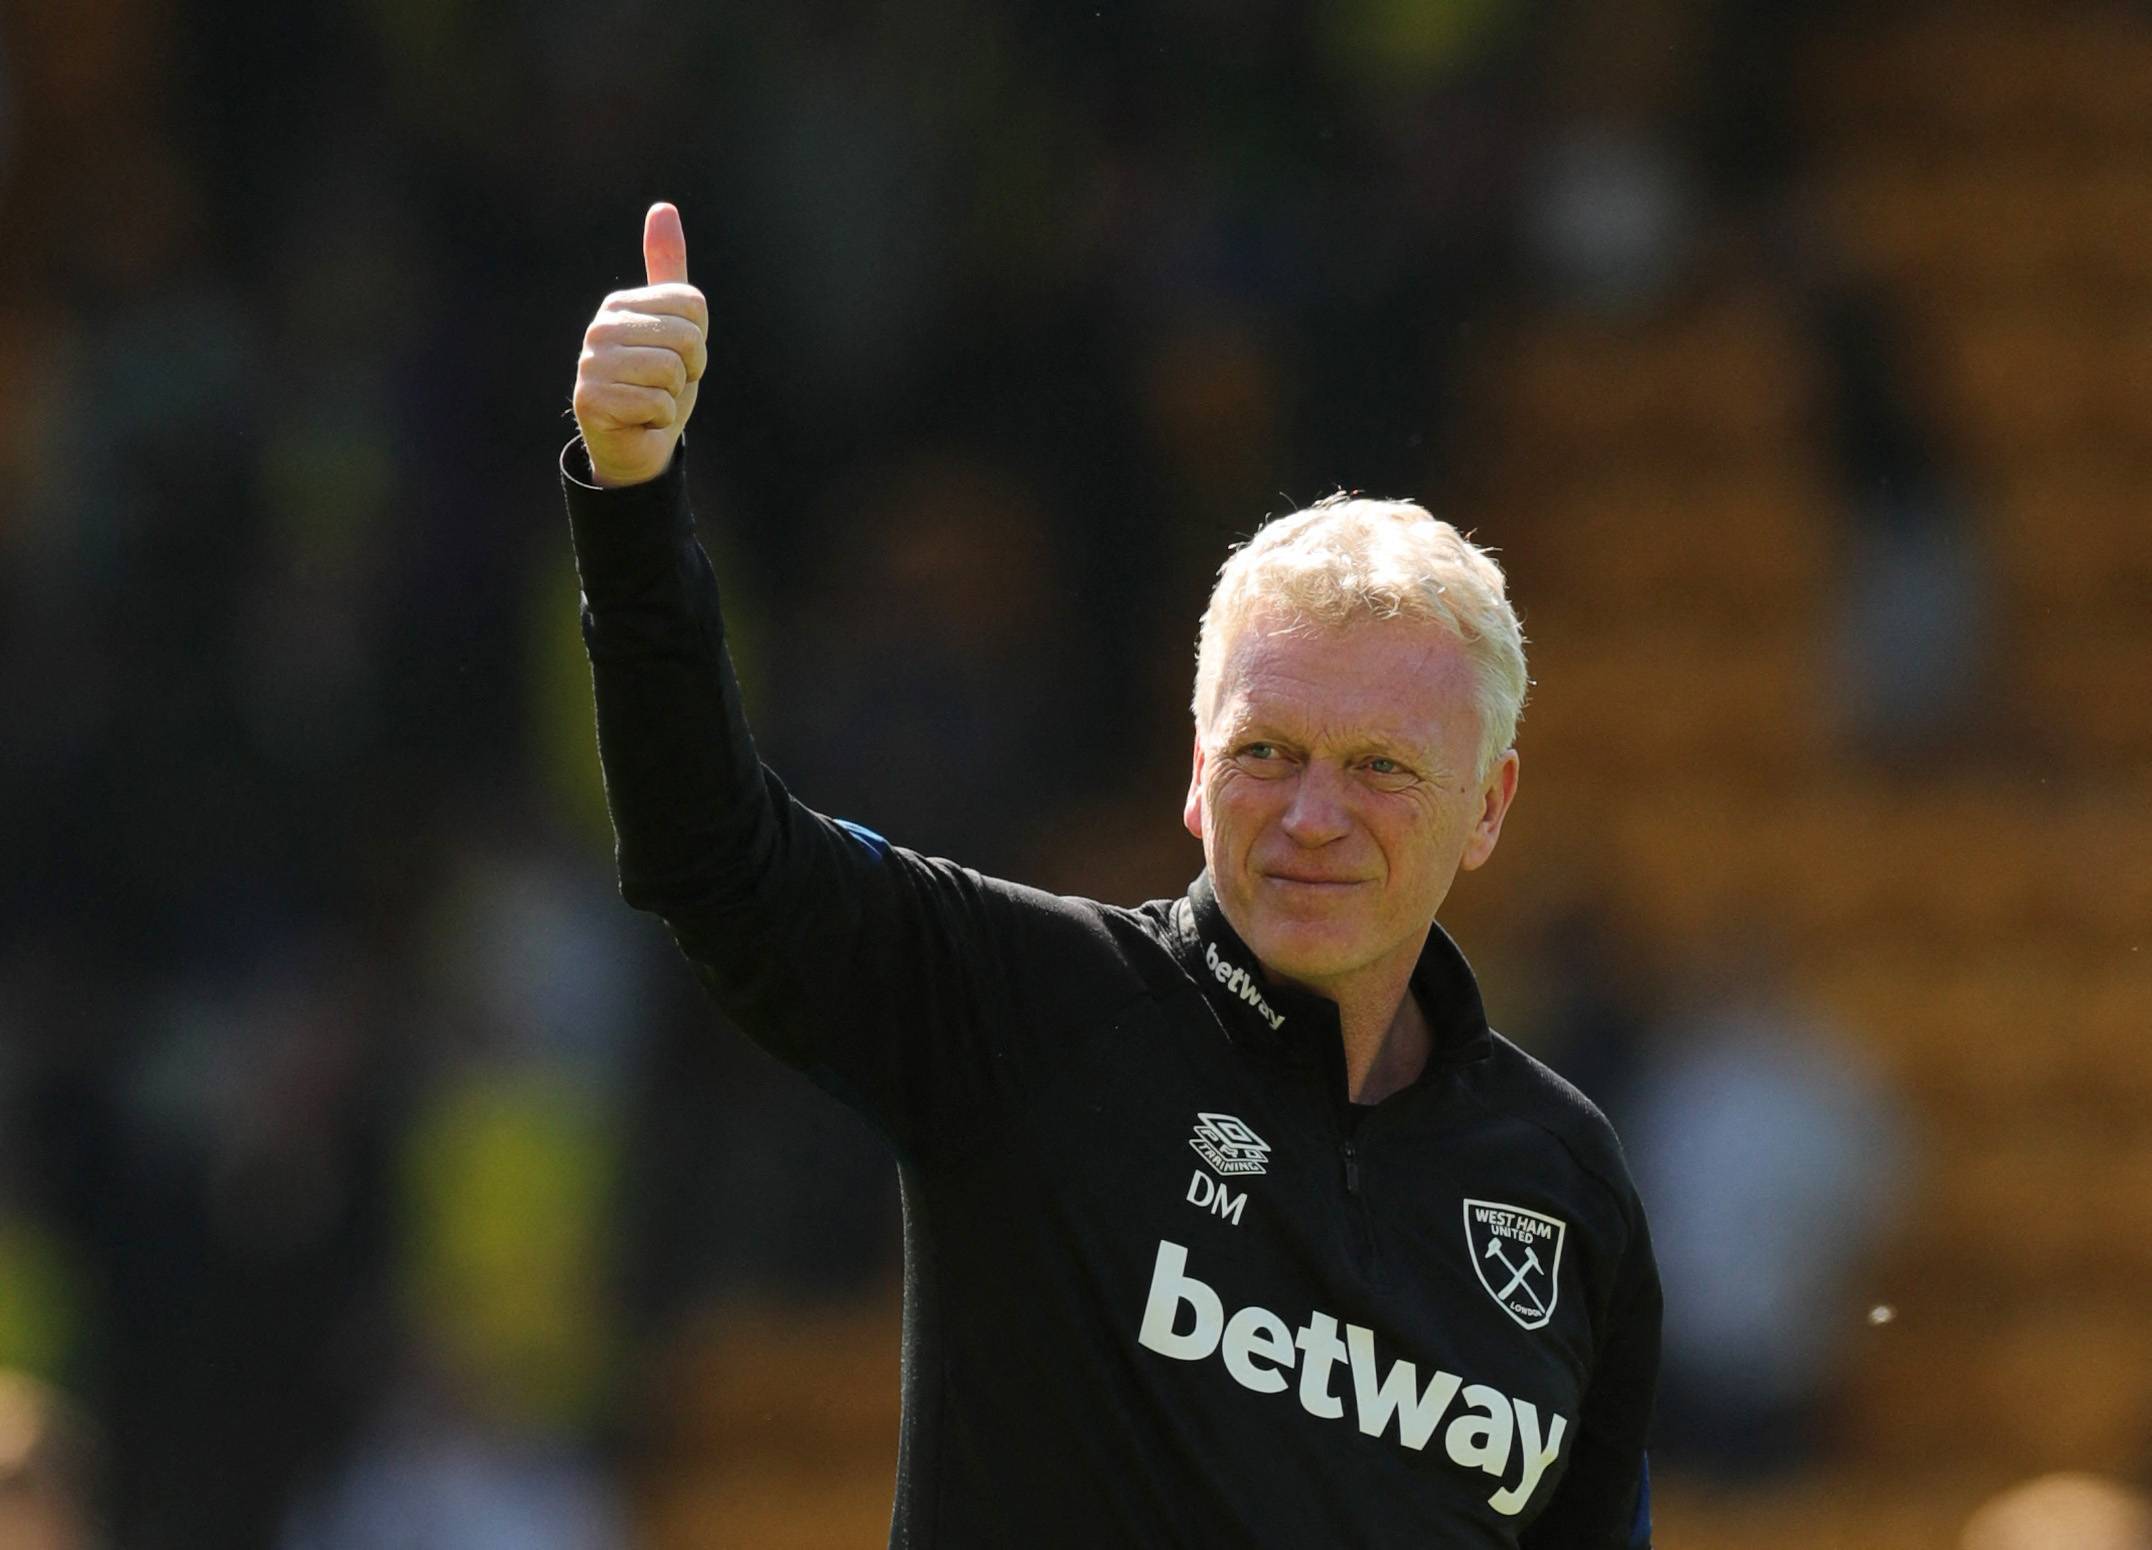 West Ham United boss David Moyes giving the thumbs-up to the fans